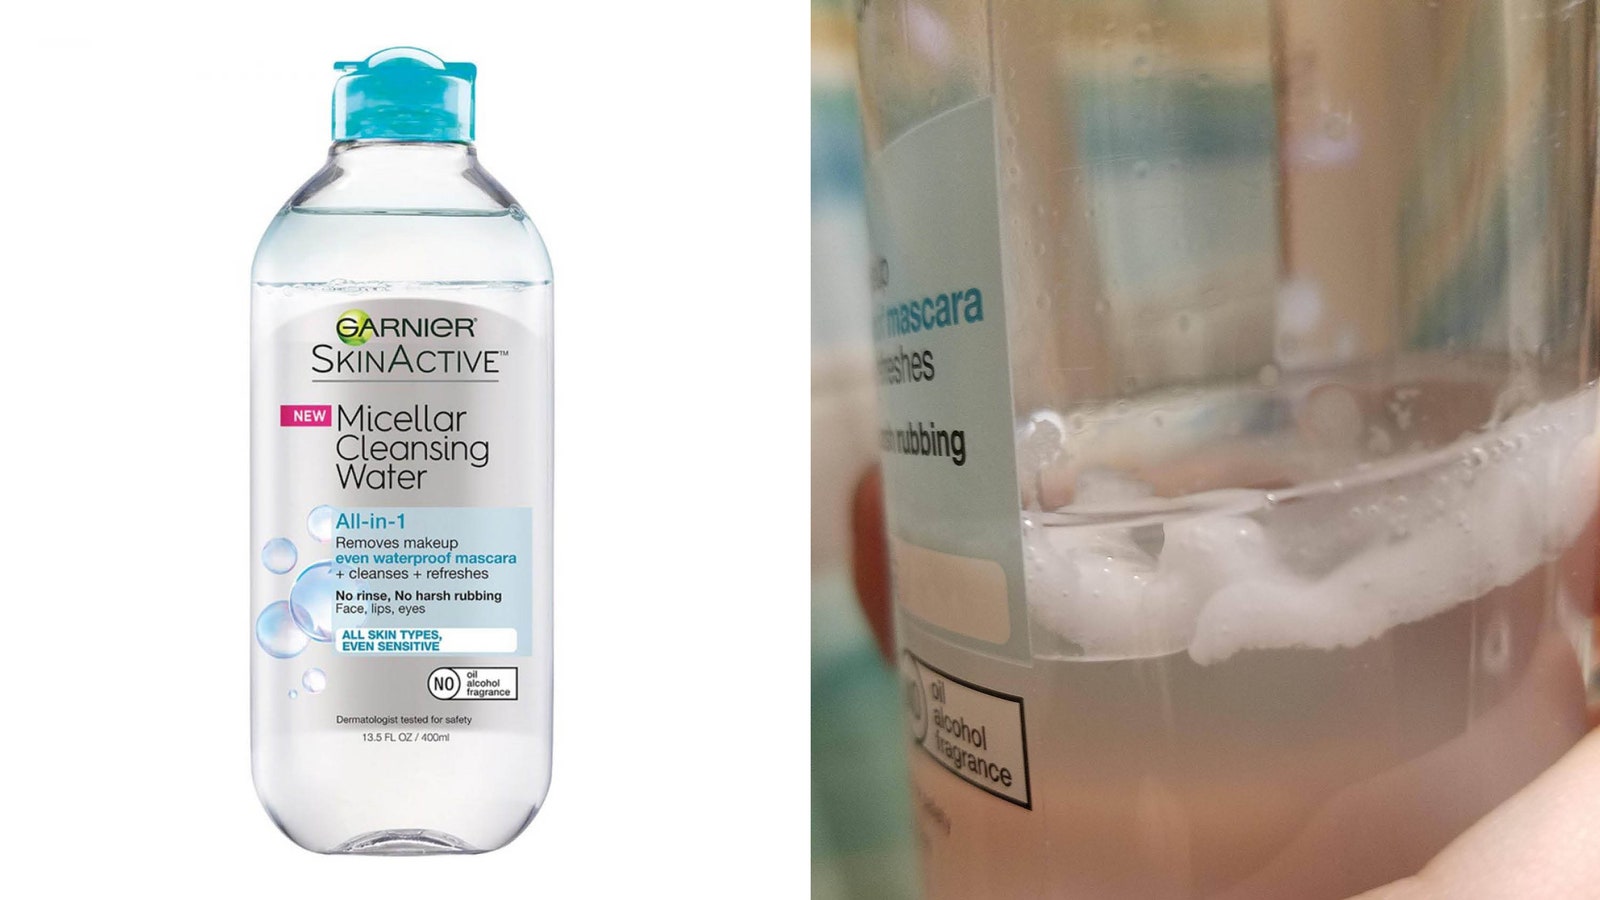 How to Open Micellar Water Bottle